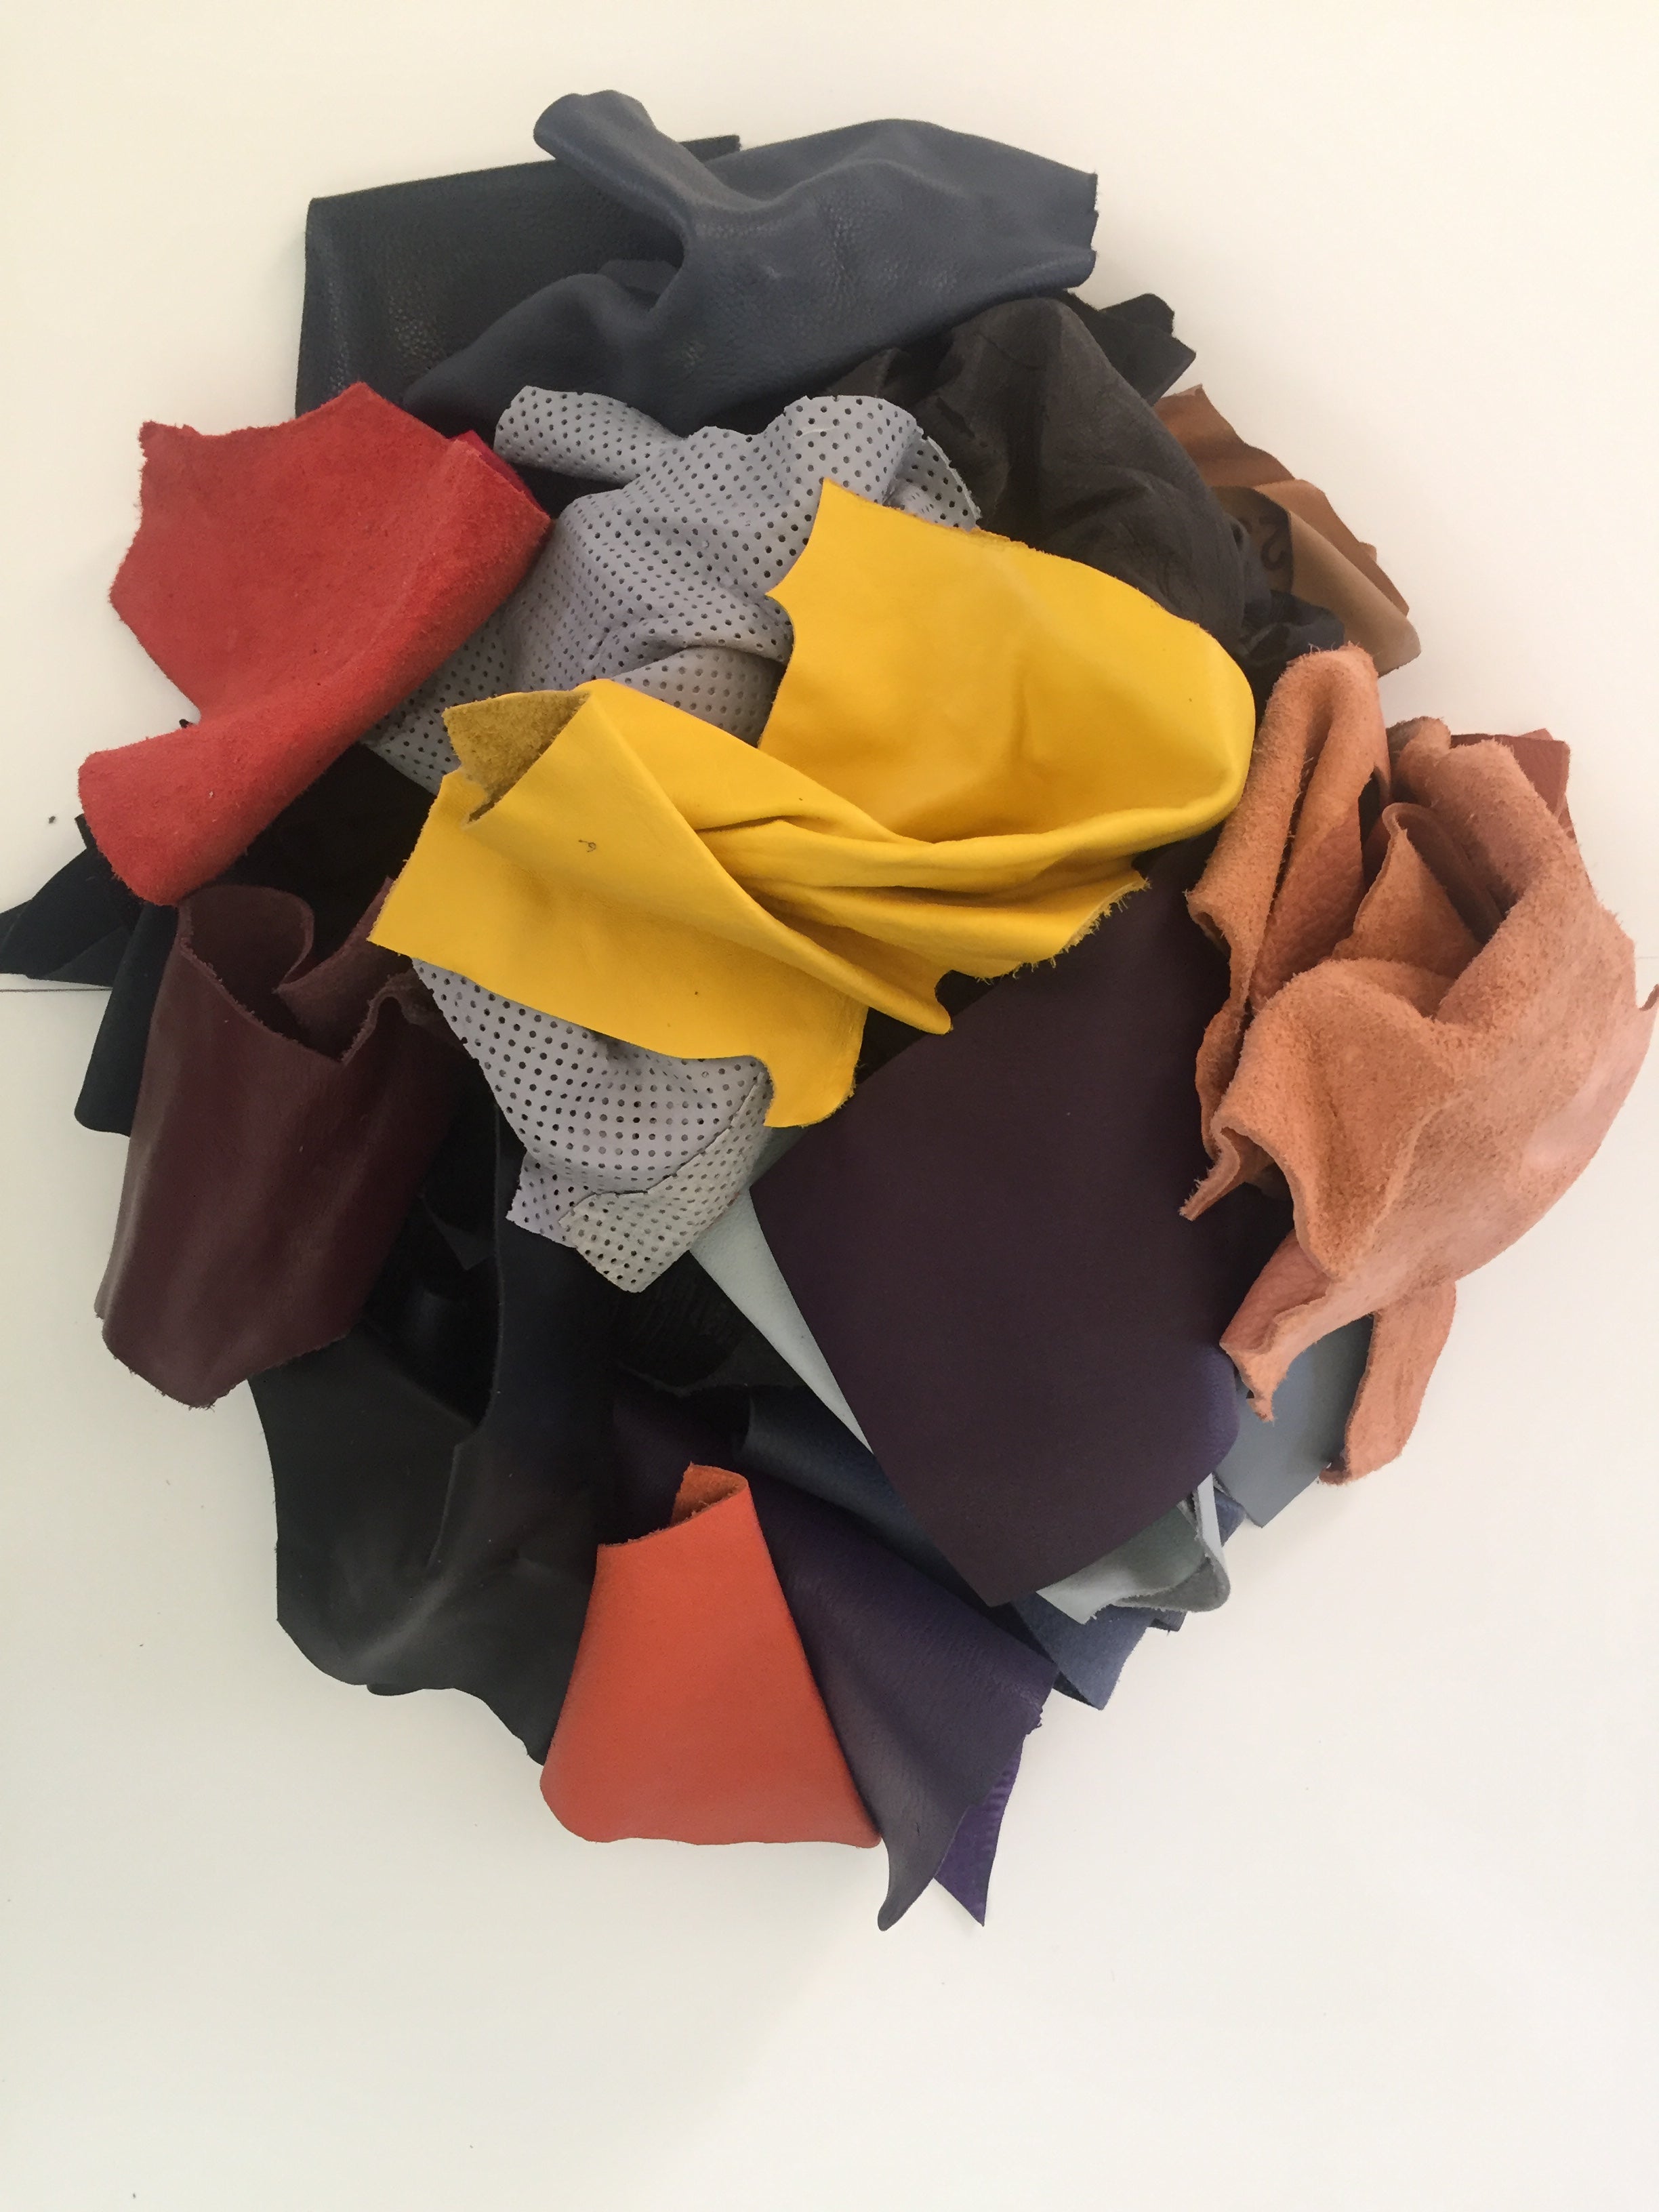 Genuine Leather Scraps, Leather Crafting Material